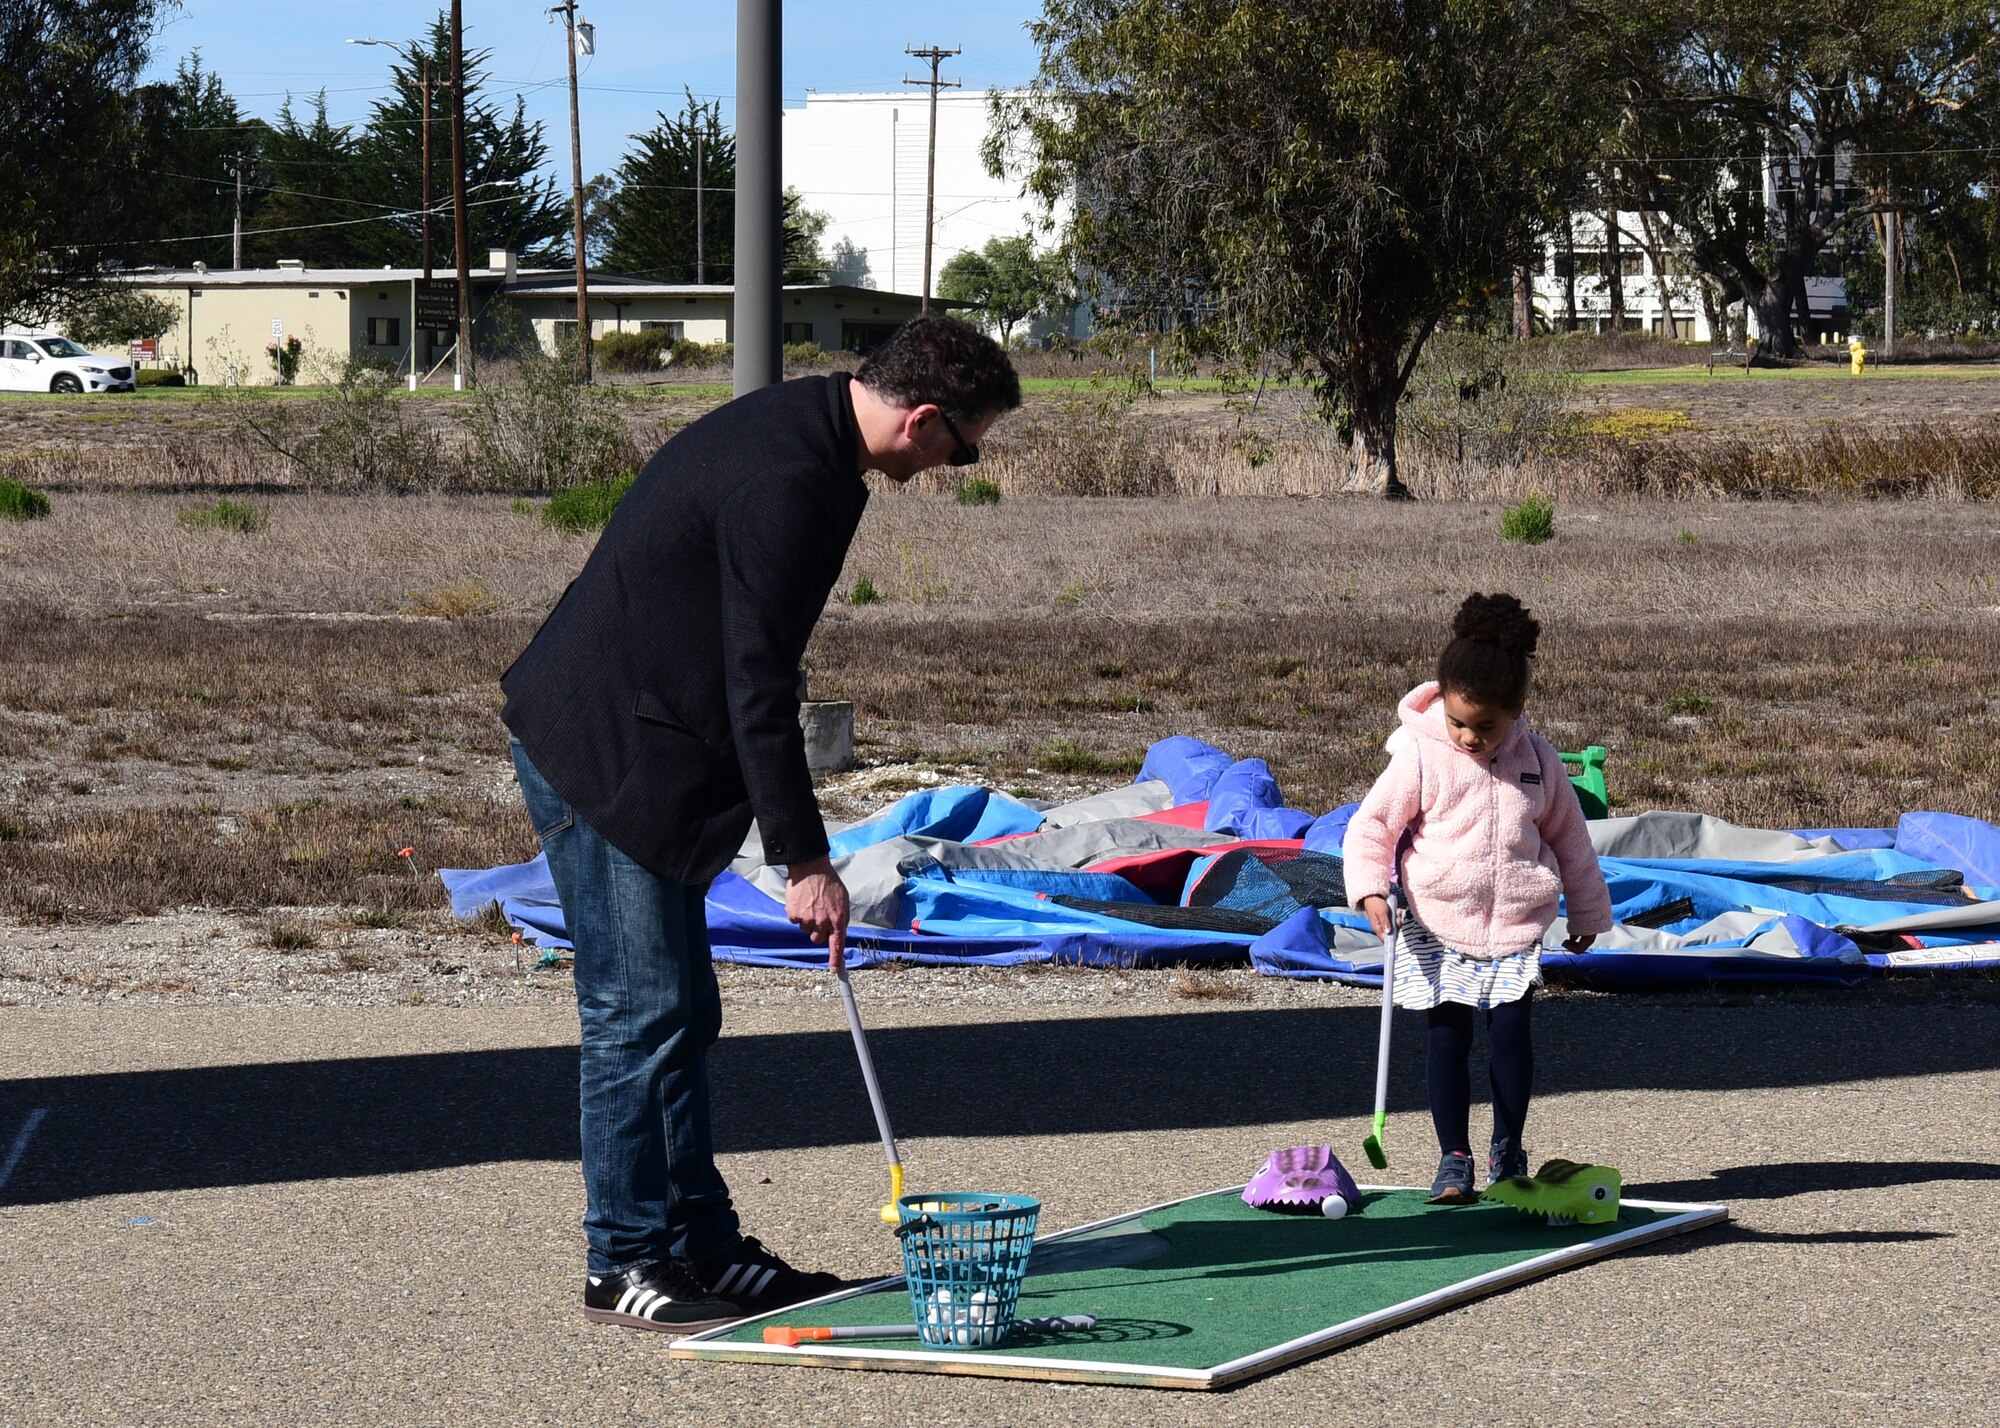 Families enjoyed mini golf and many other activities during Vandenberg’s Ninth Annual Exotic Car Show Oct. 23, 2021, at Vandenberg Space Force Base, Calif. Other activities including corn hole, wall climbing and an inflatable obstacle course were available for members and their families to enjoy at the car show. (U.S. Space Force photo by Airman First Class Tiarra Sibley)